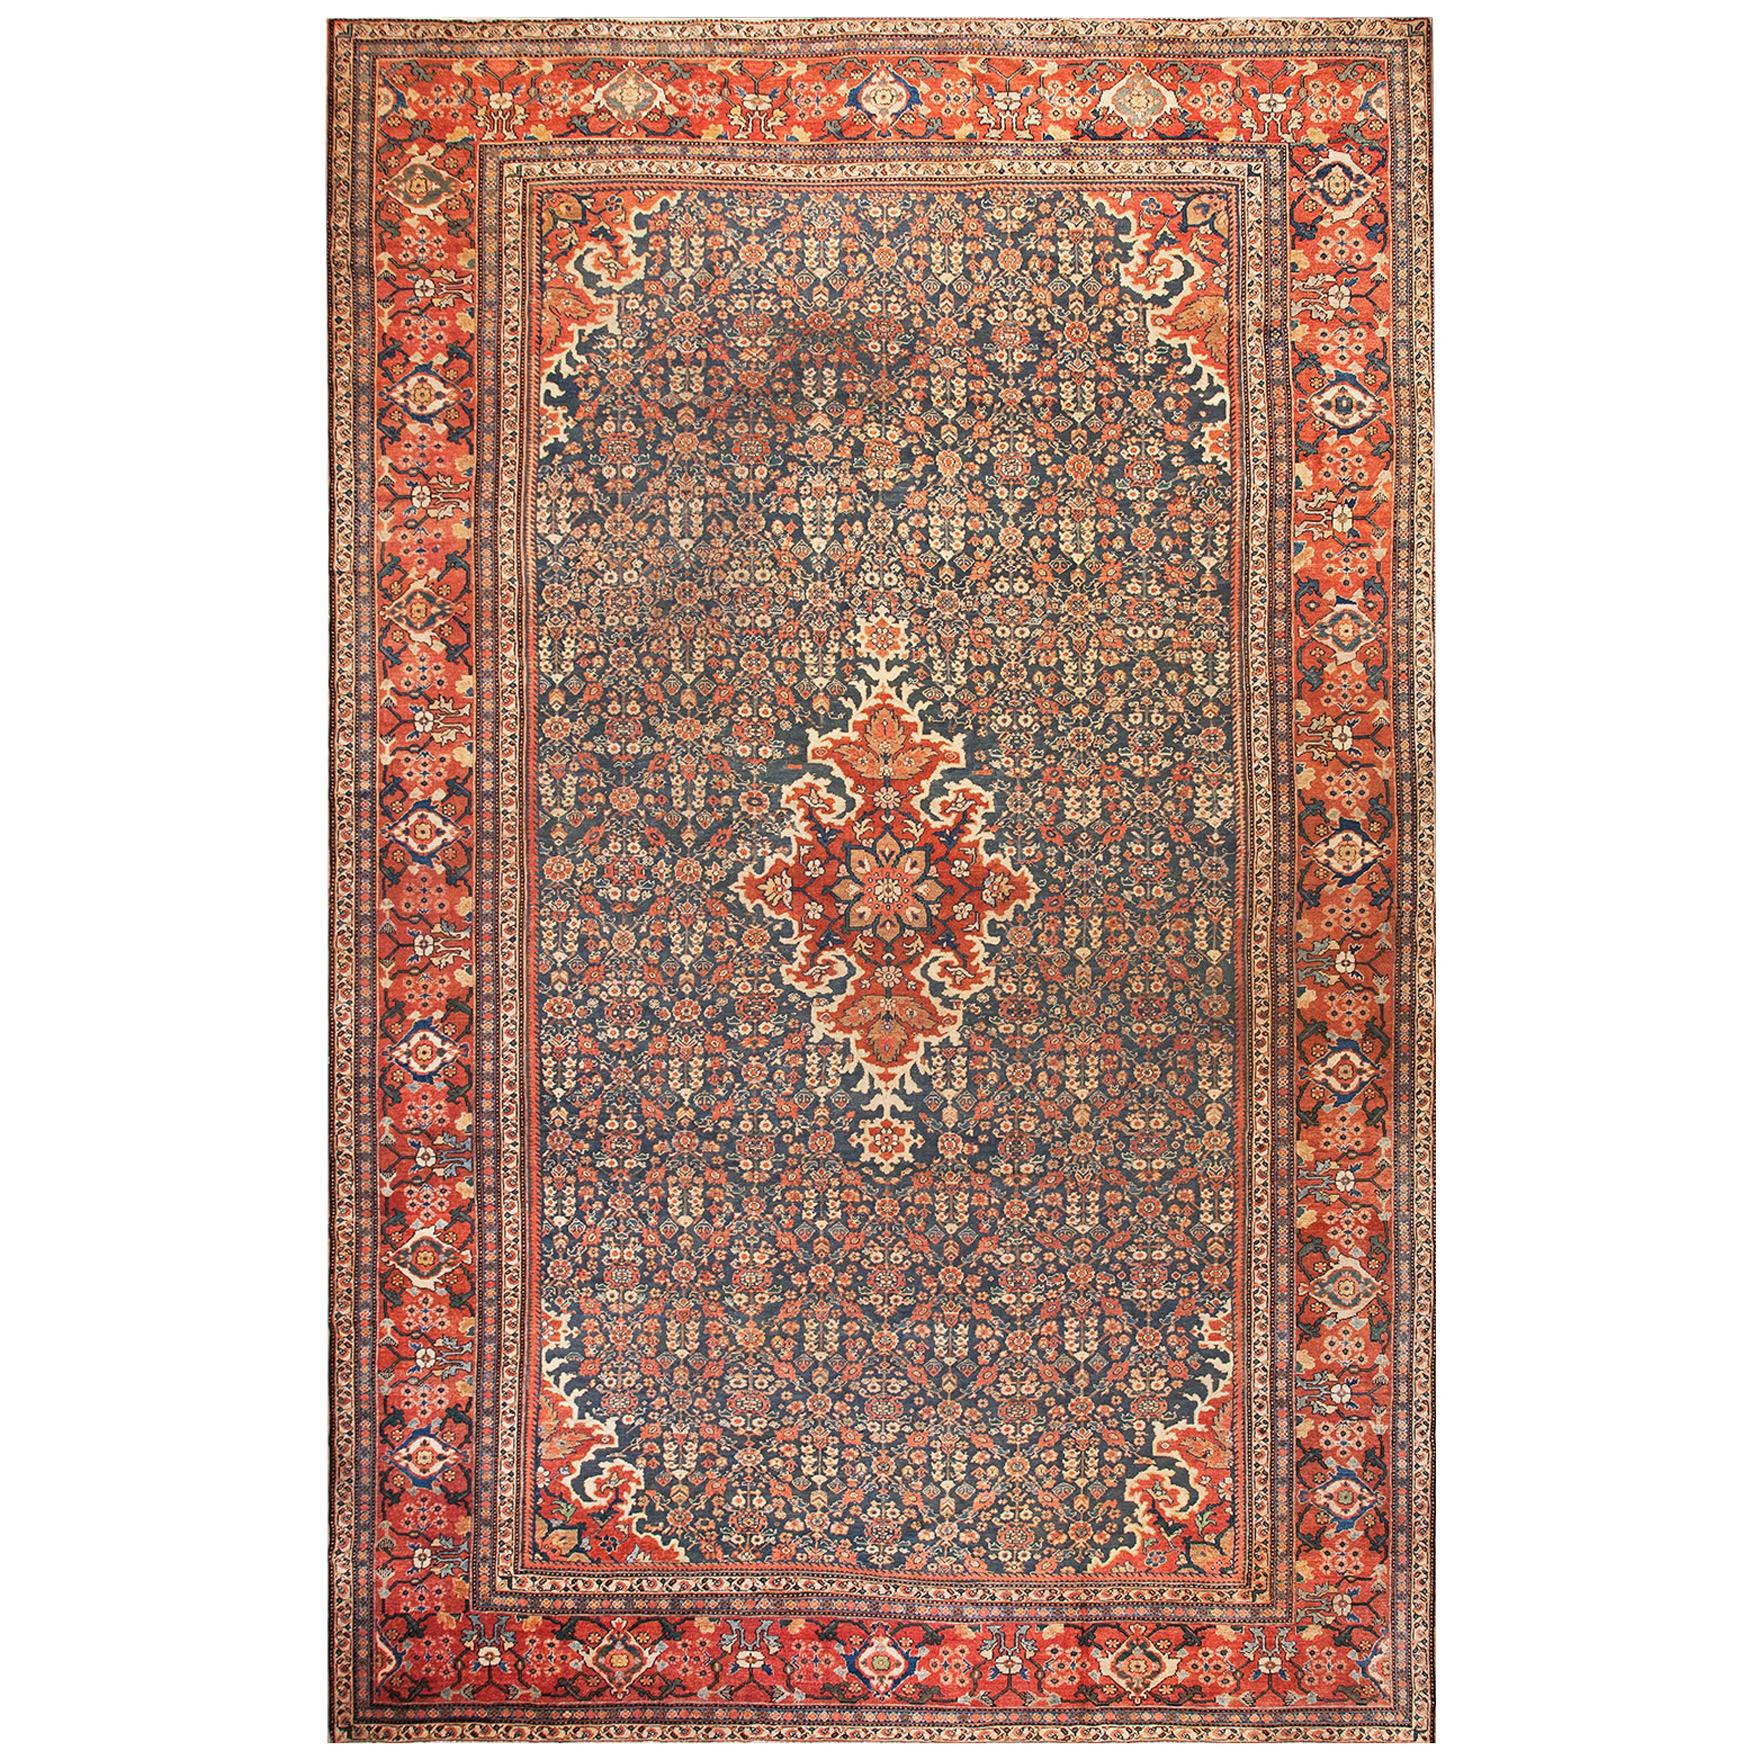 Early 20th Century Persian Sultanabad Carpet ( 11'7" x 18'7" - 355 x 565 )